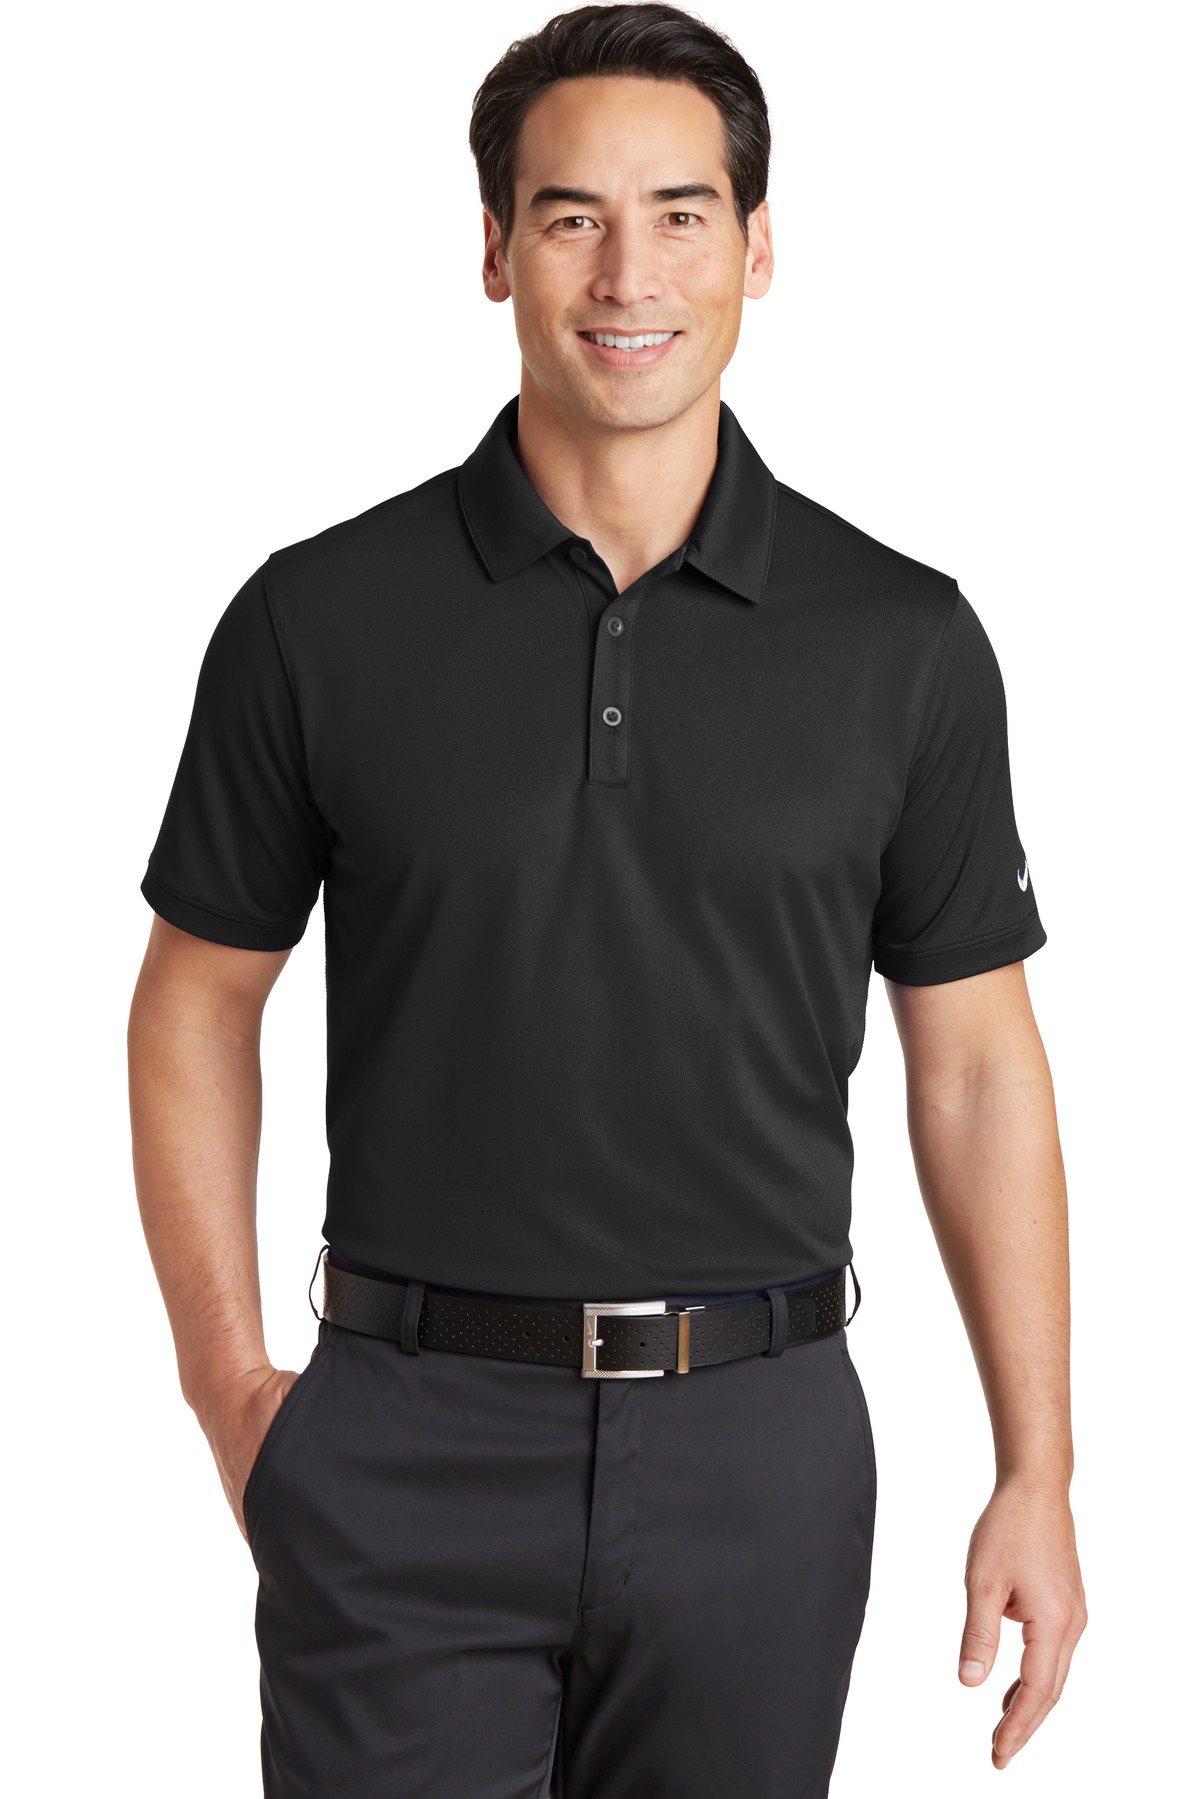 Nike Dri-FIT Solid Icon Pique Modern Fit Polo-